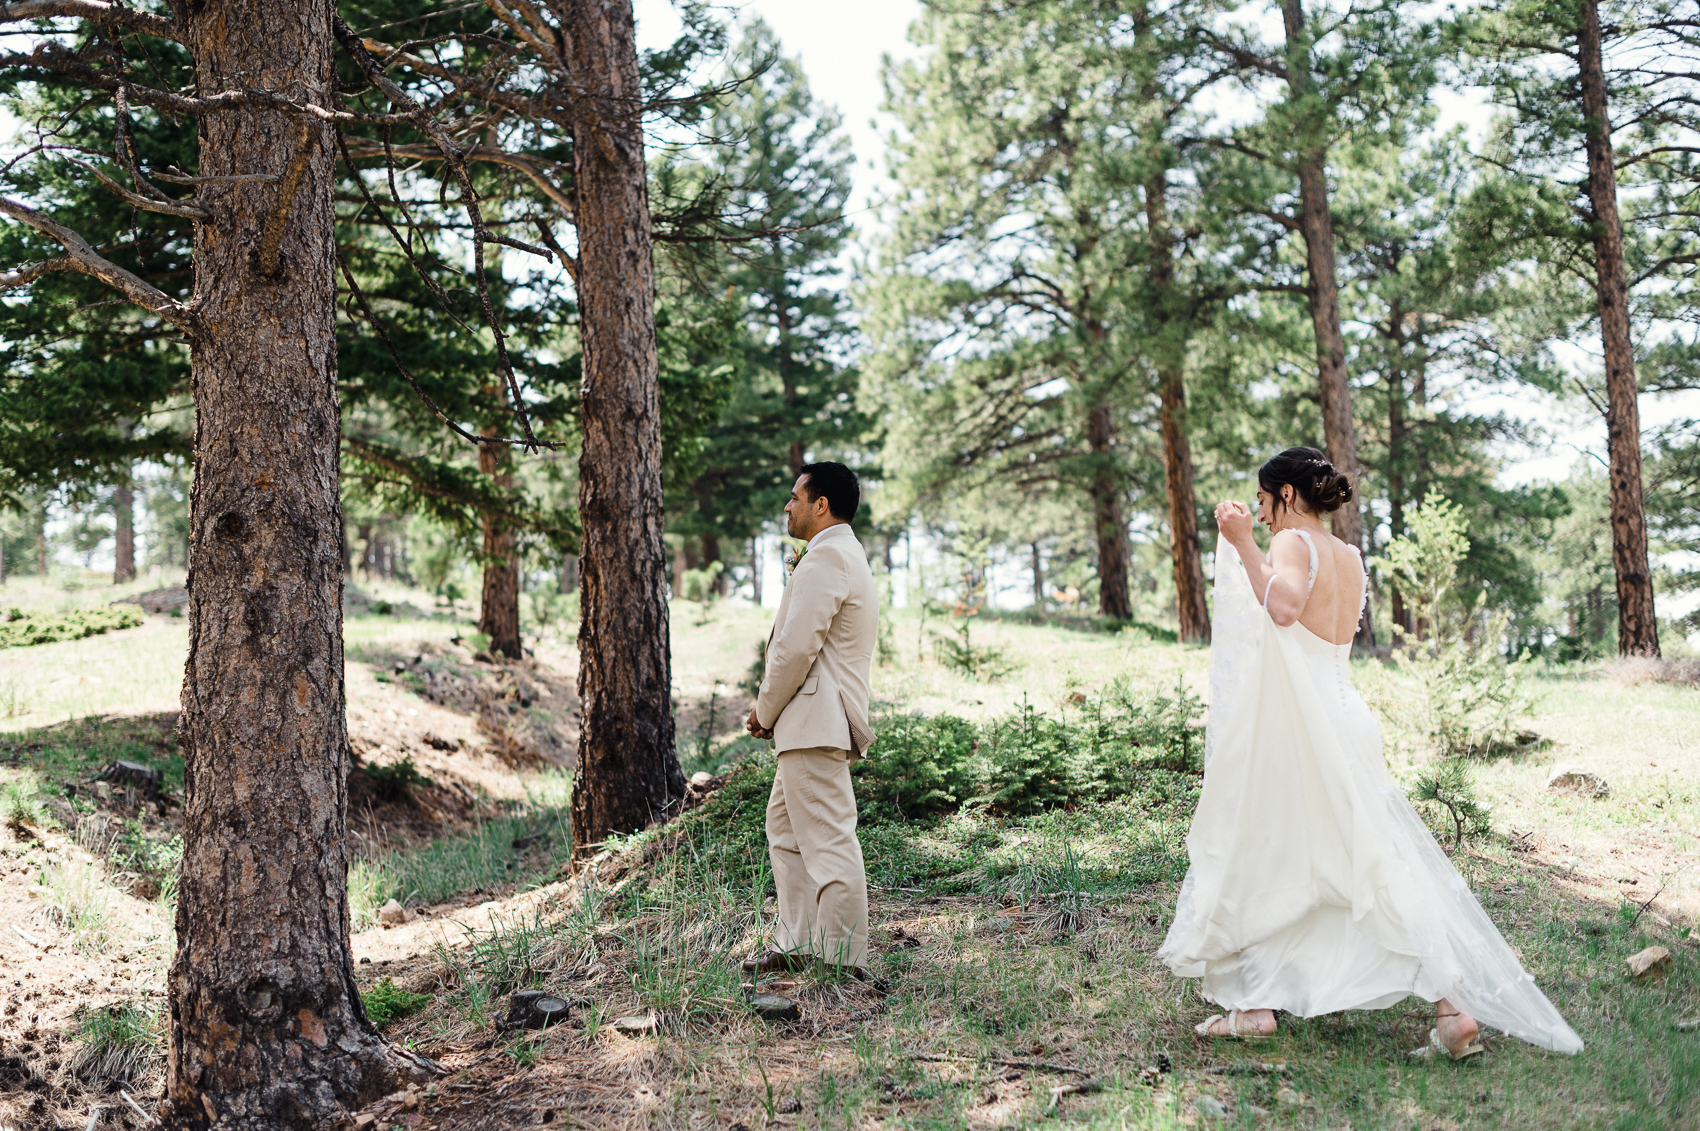 The sun setting over the breathtaking landscape of Boulder, Colorado, casting a golden glow on the venue where the couple celebrated their special day.